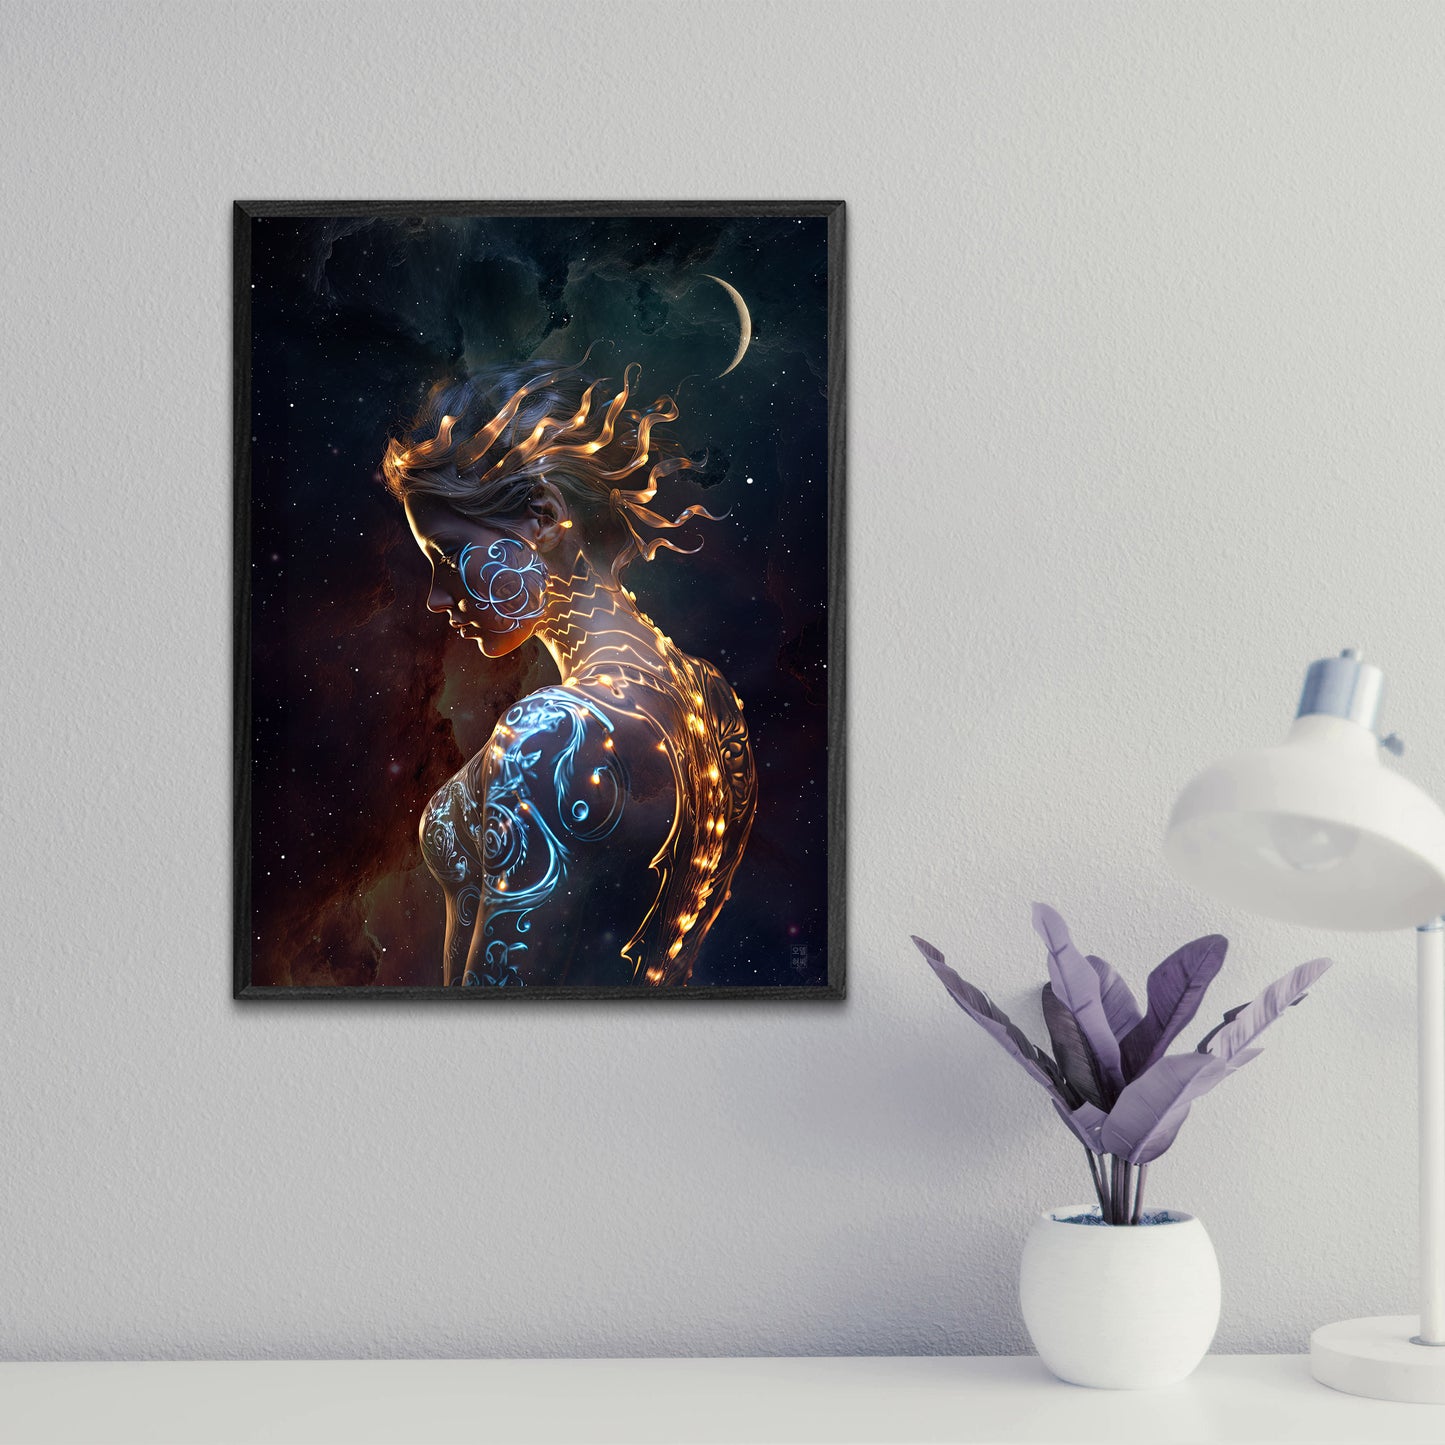 Beautiful Space Glow 18X24 Inch Poster Print for Space Art Fans, for home decor and room design